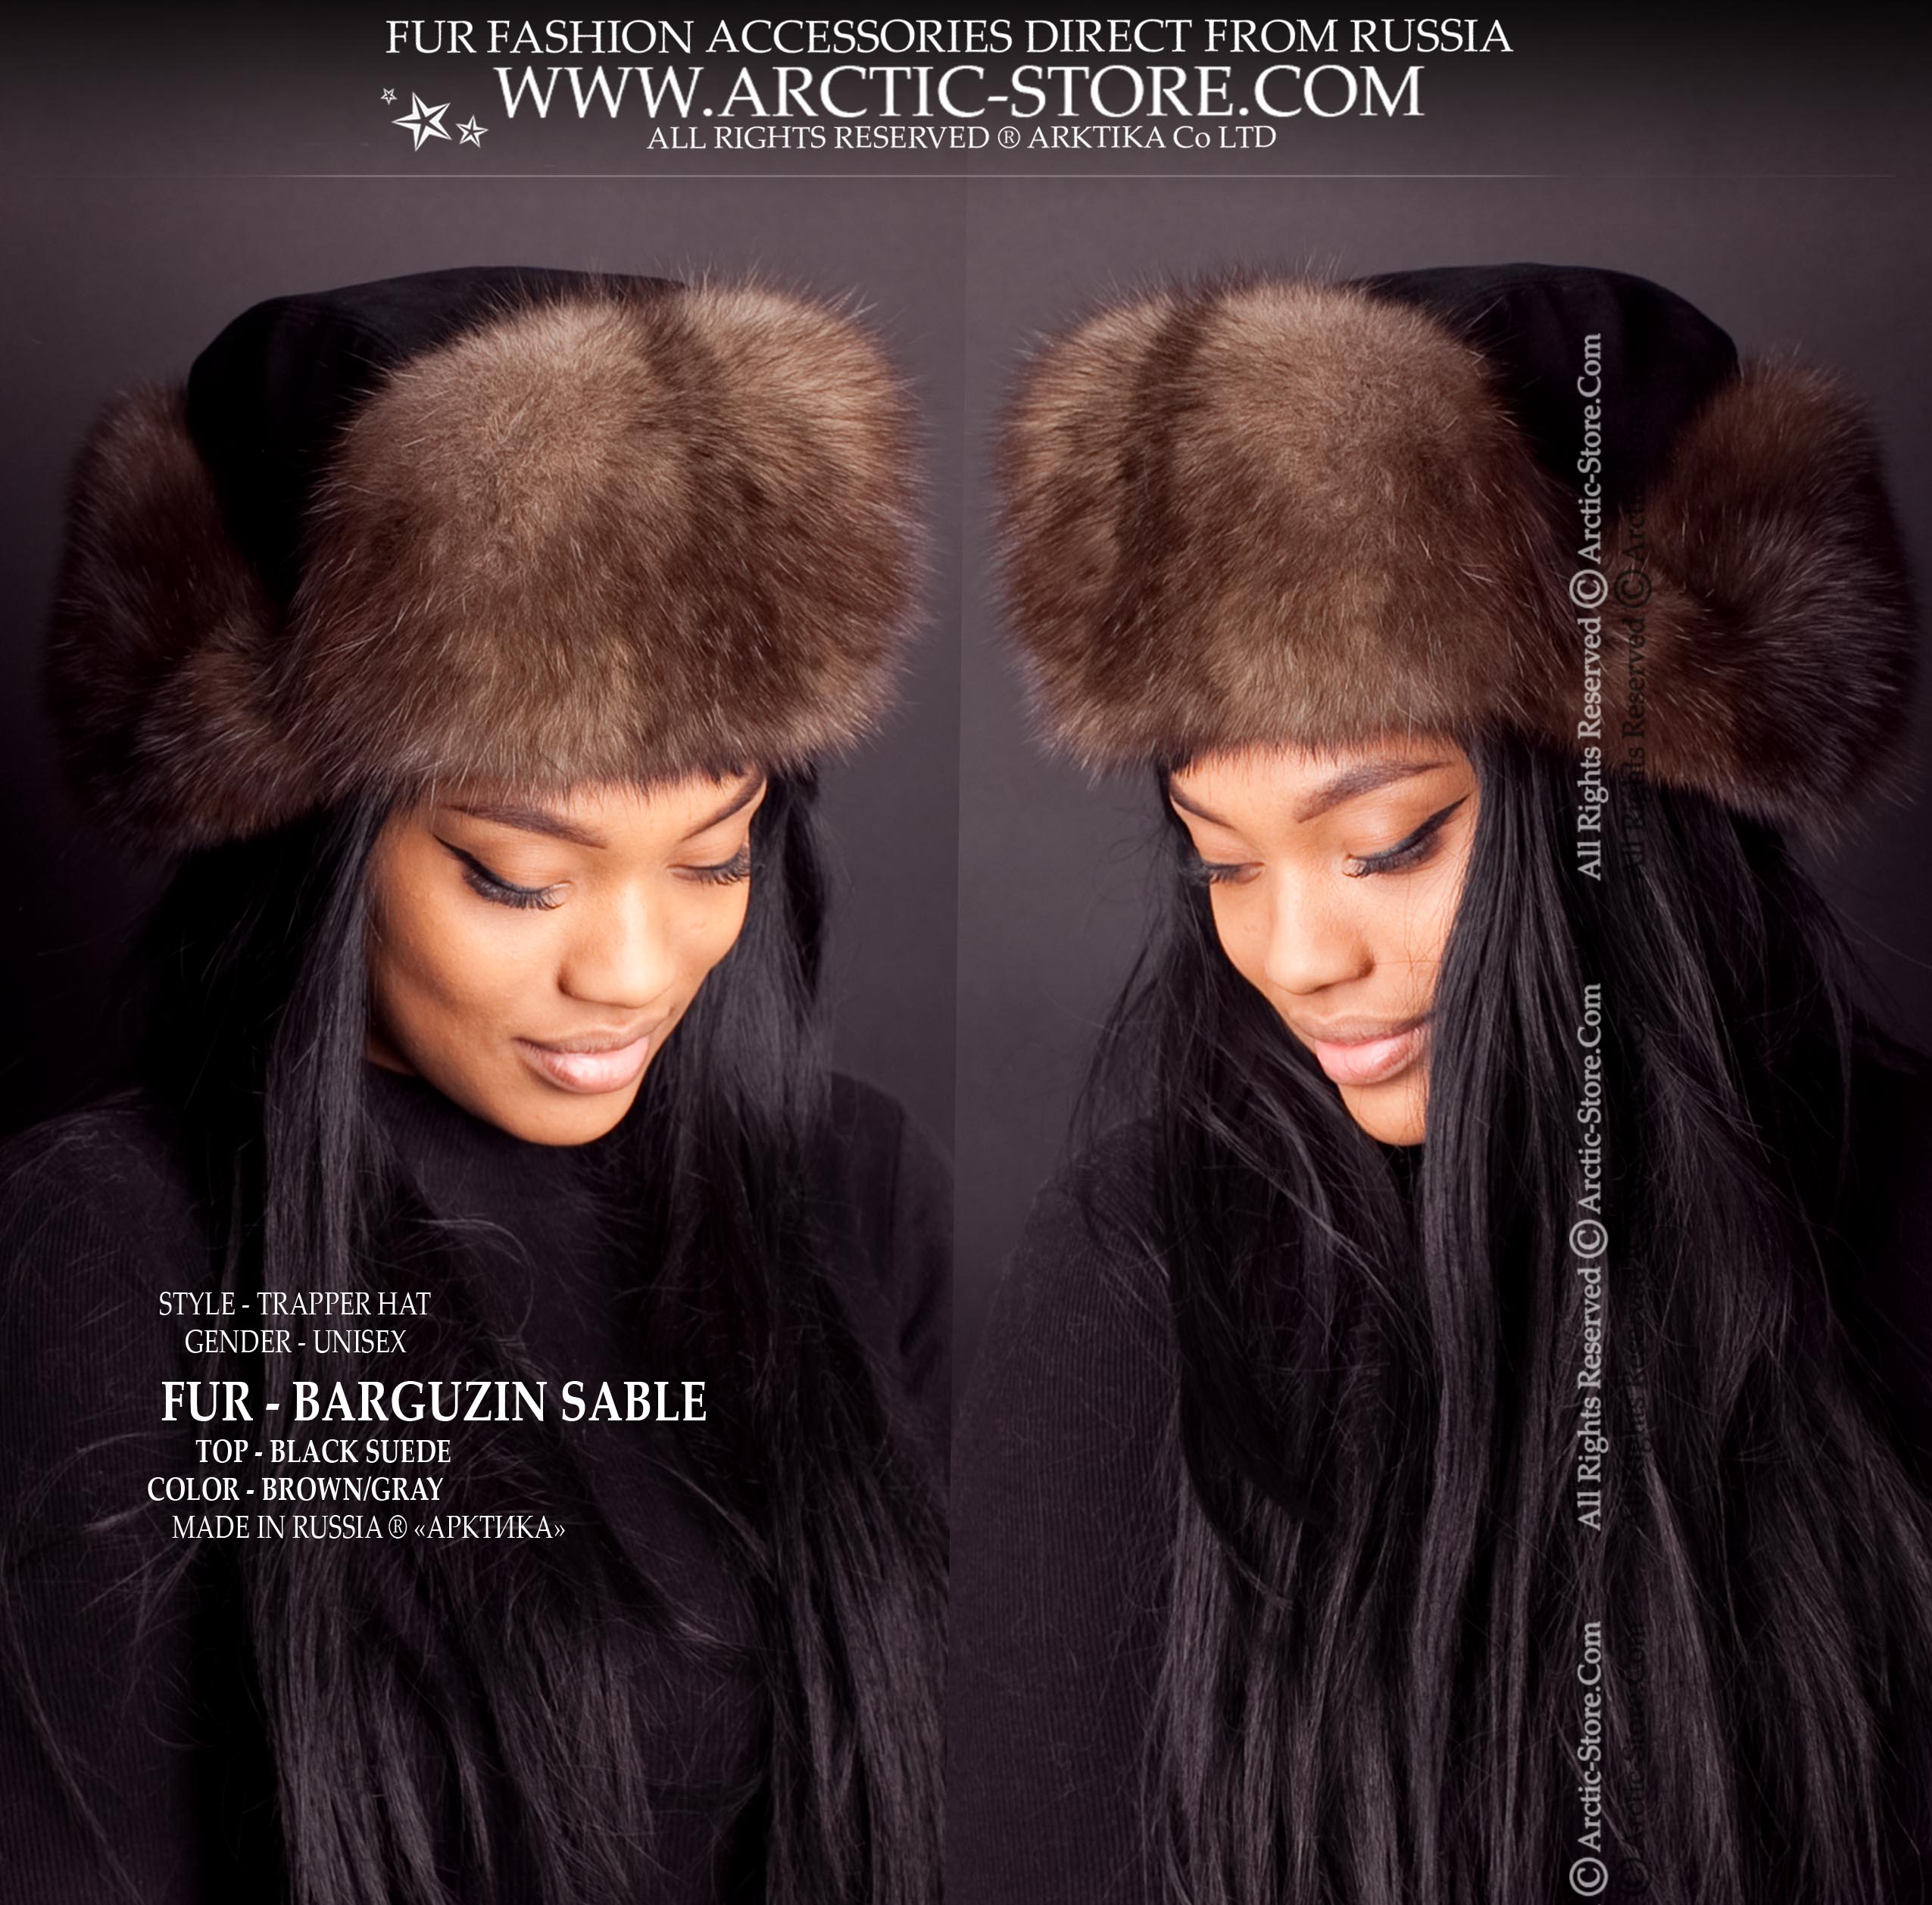 sable hats for sale